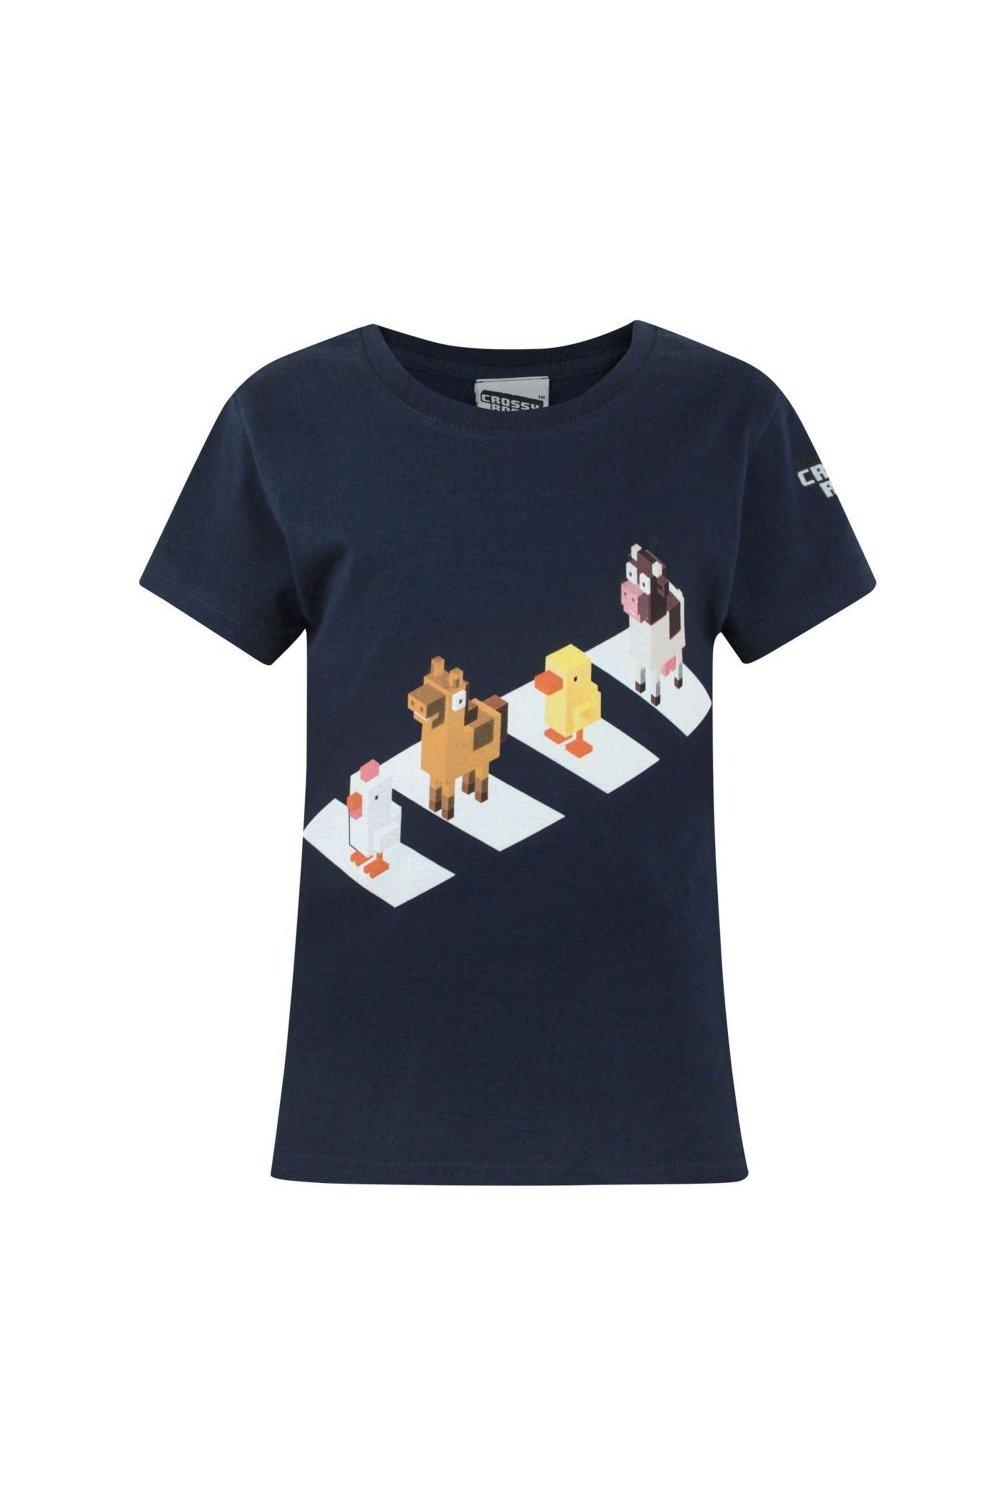 Crossy Road Official Character Crossing Short Sleeved T-Shirt